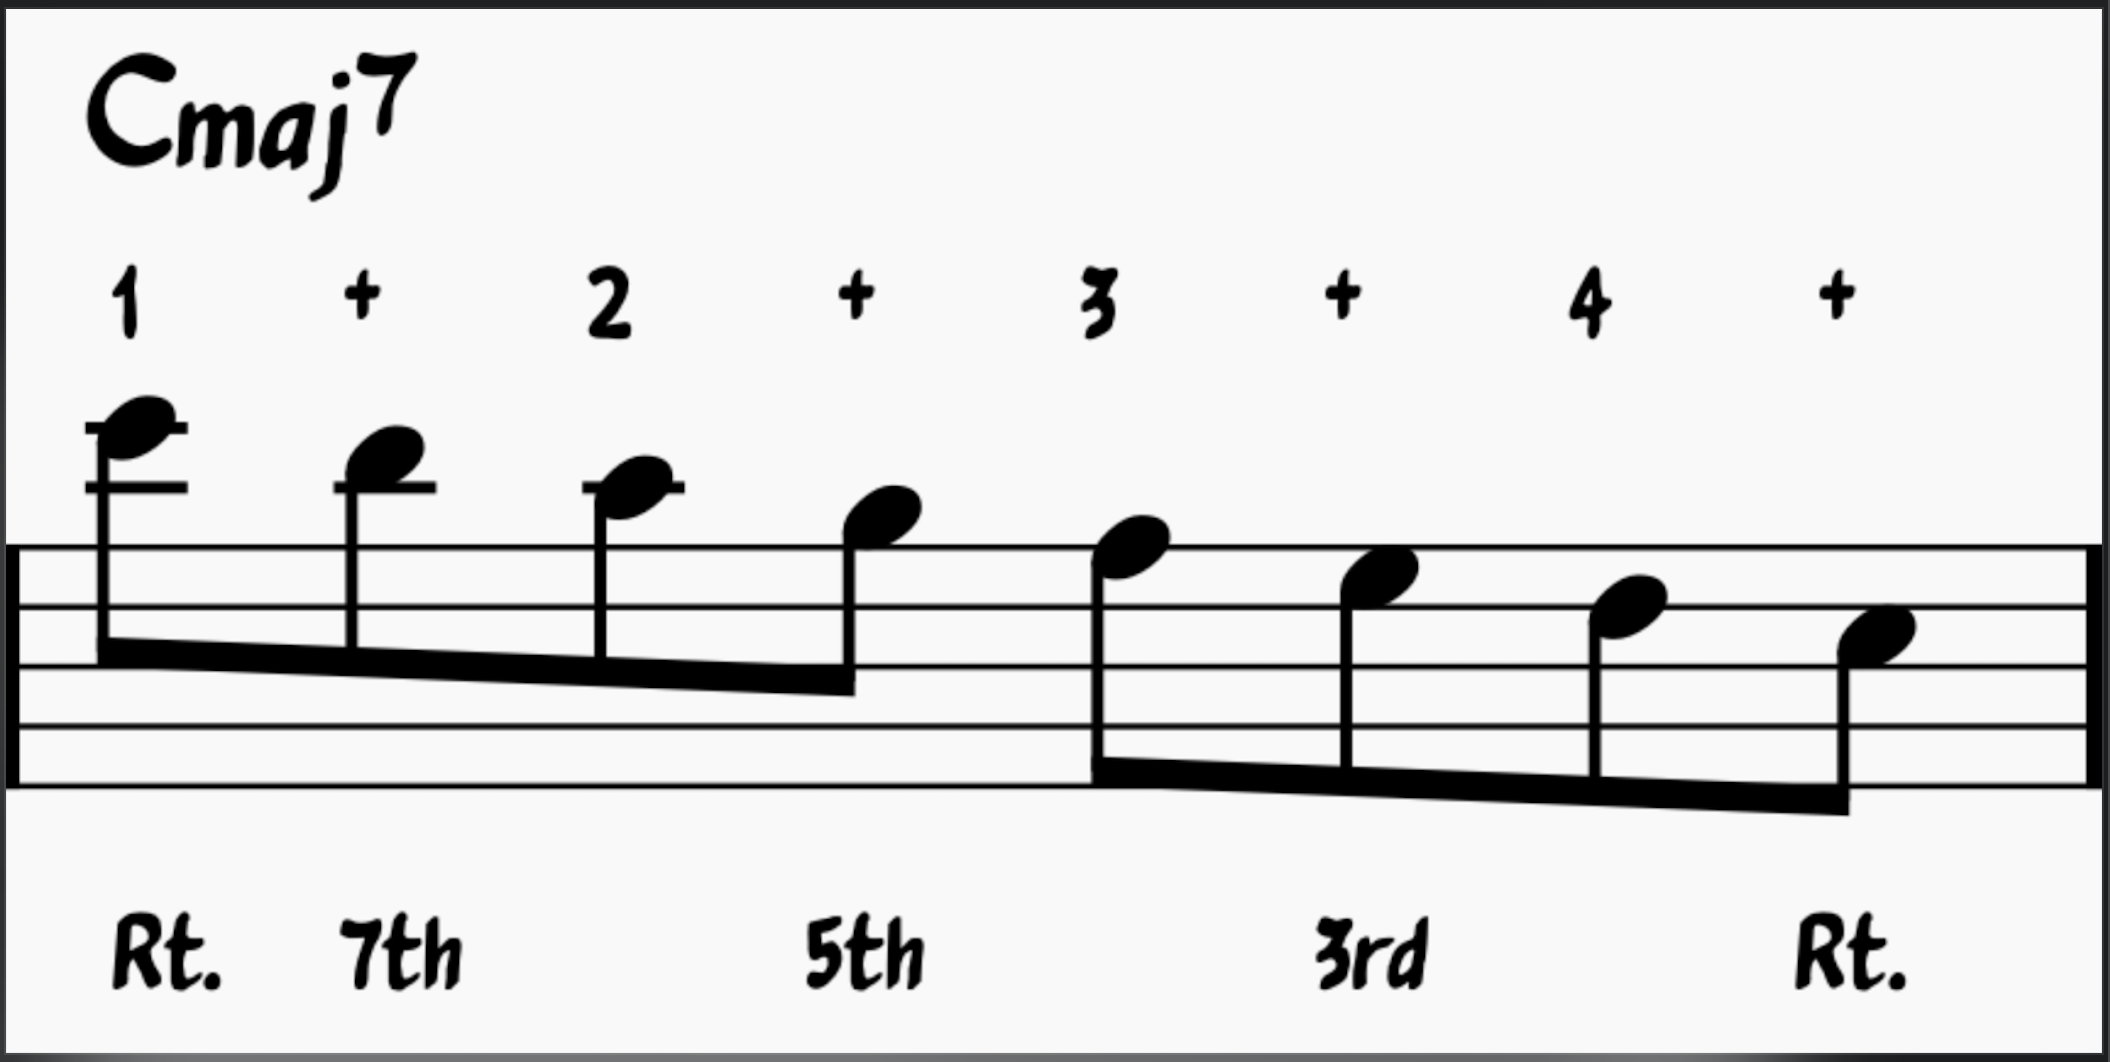 Regular descending major scale pushes chord tones off of strong beats by the (+) of 2